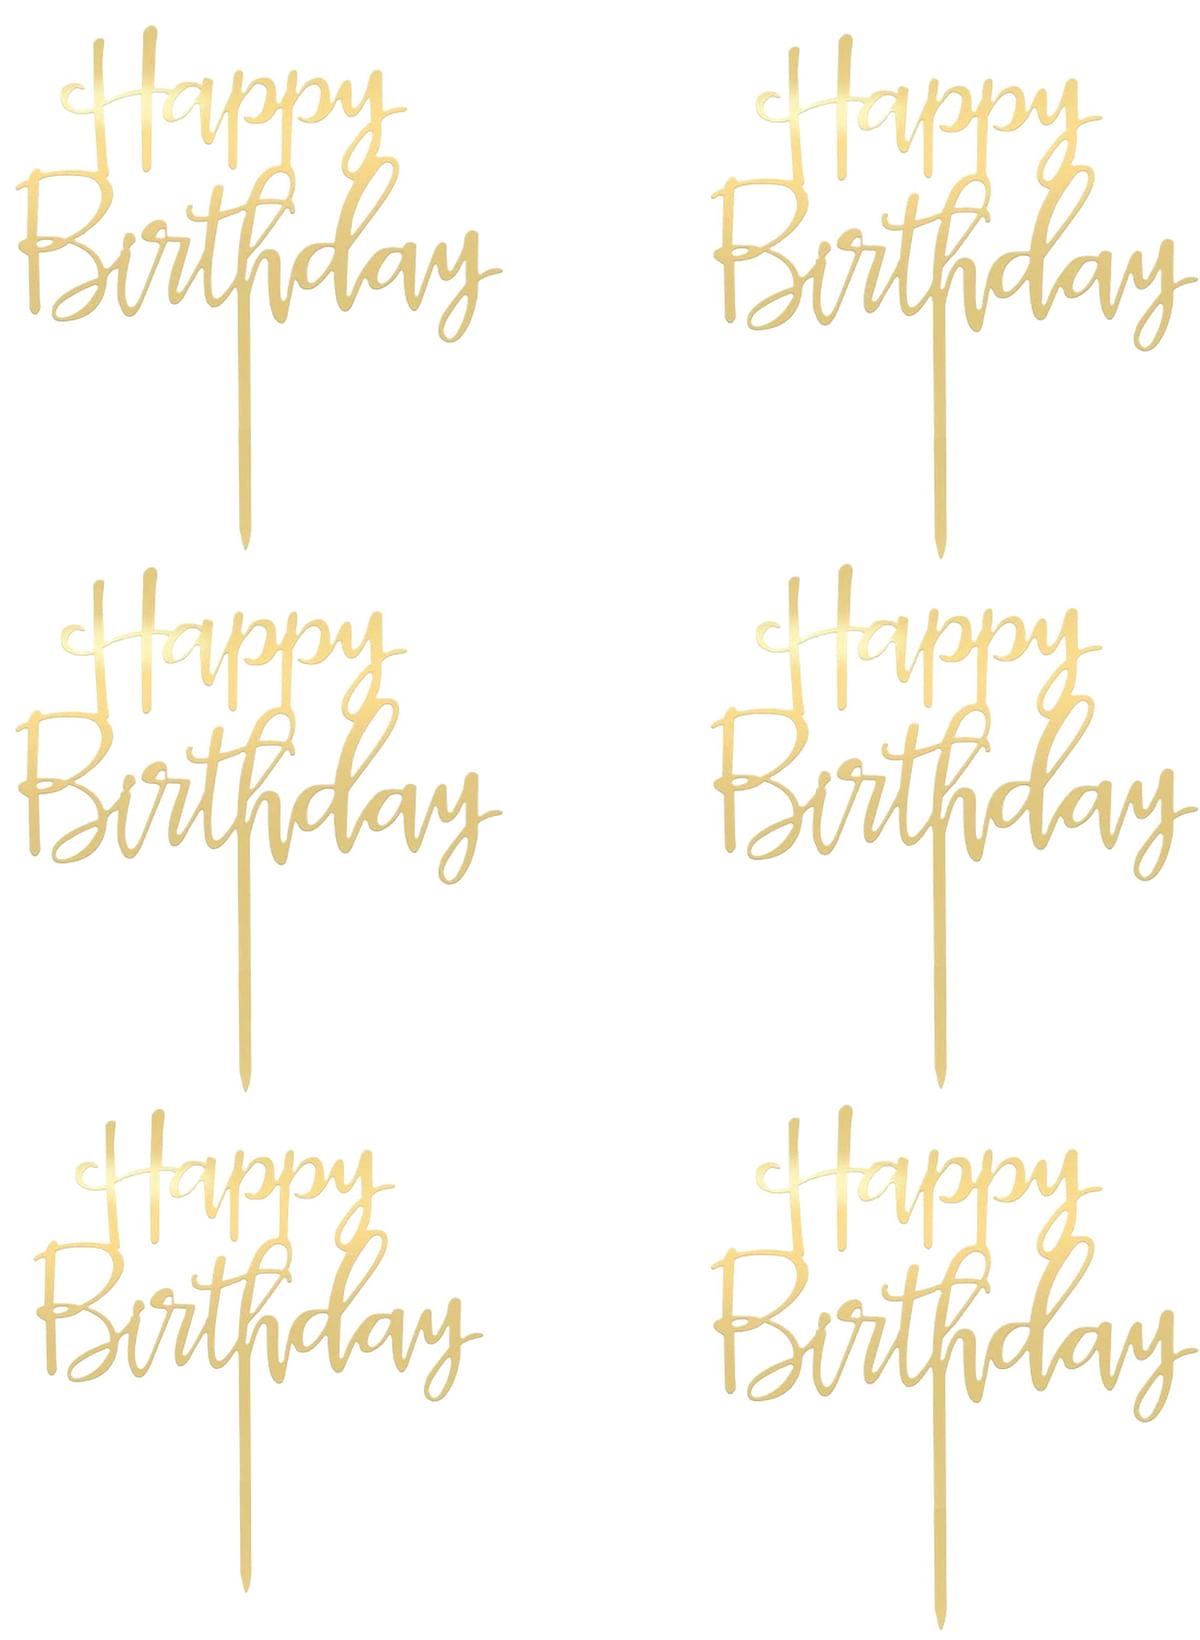 6 Pcs Happy Birthday Cake Topper Mirrored Gold Acrylic Durable Versatile Photo Booth Props Ideal for Birthday Party Decorations